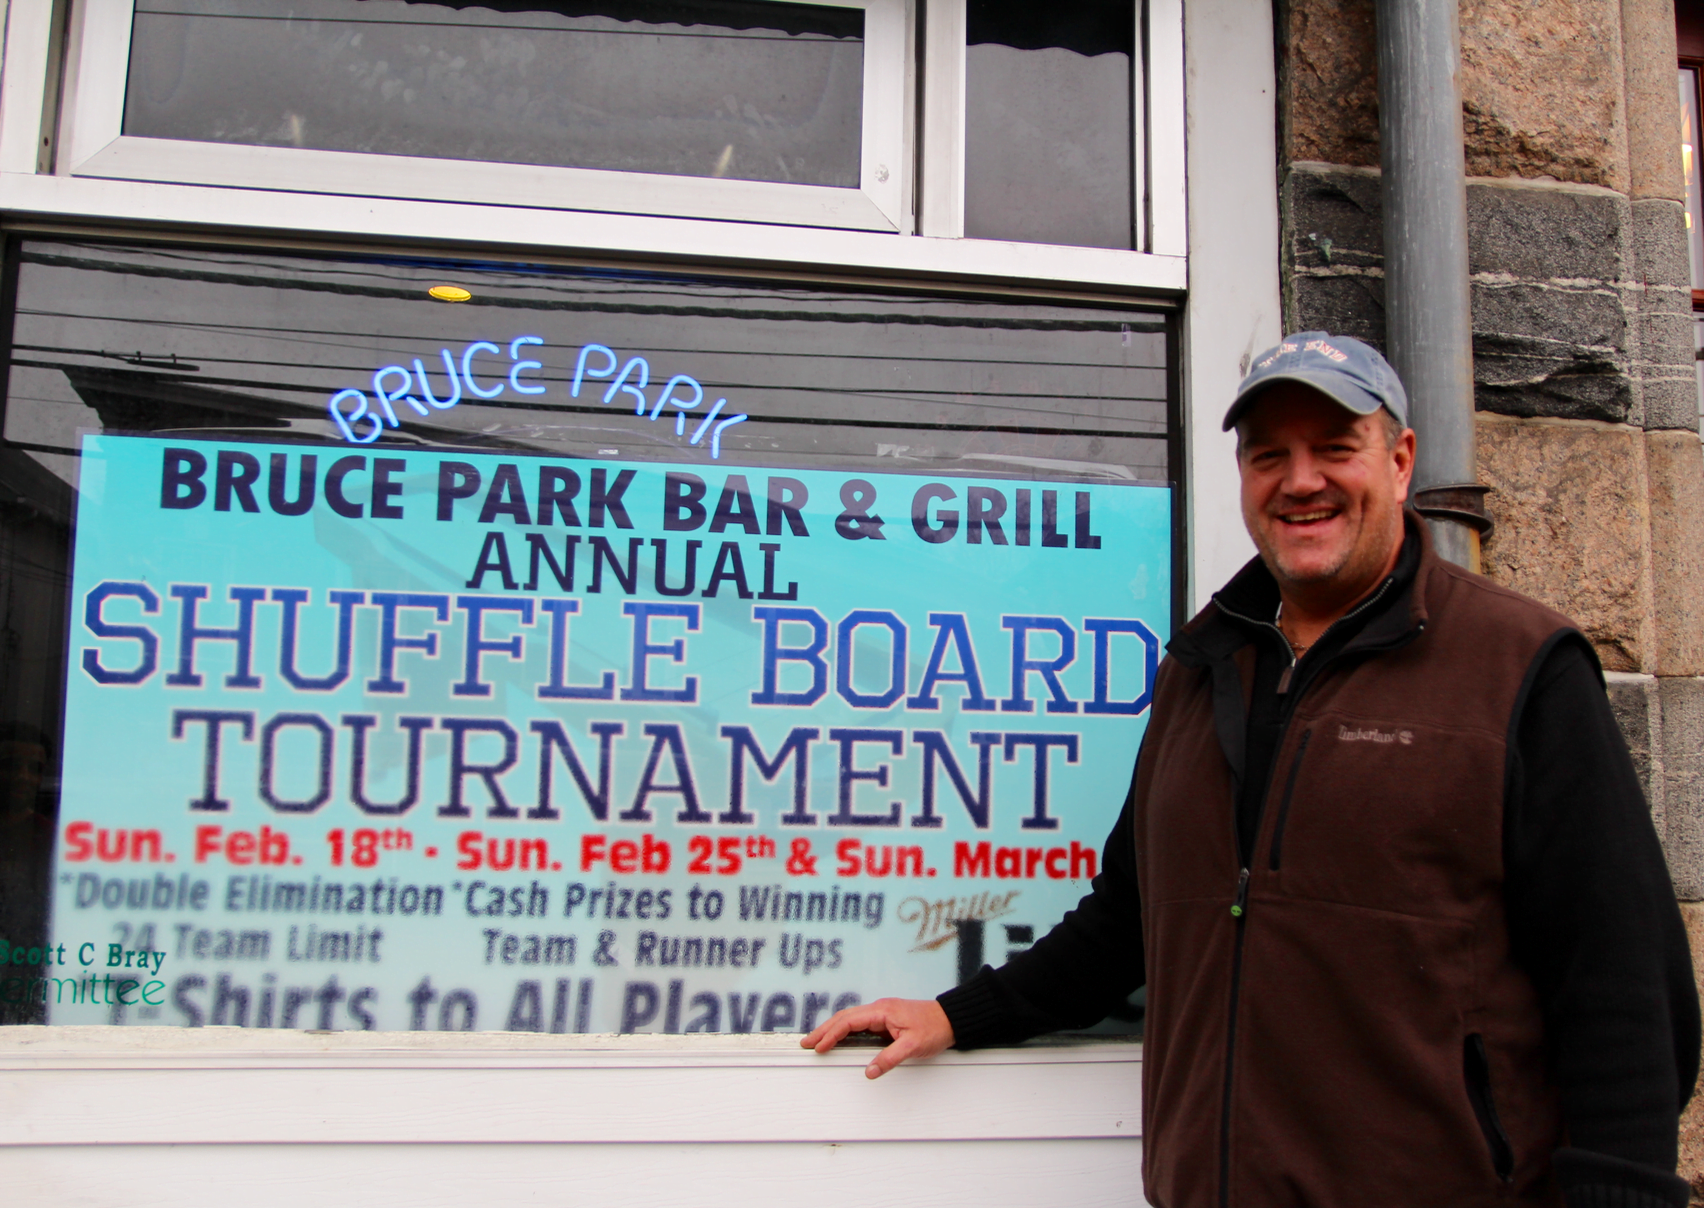 Scott Bray outside his Bruce Park Grill on Feb 25. Photo: Lesie Yager